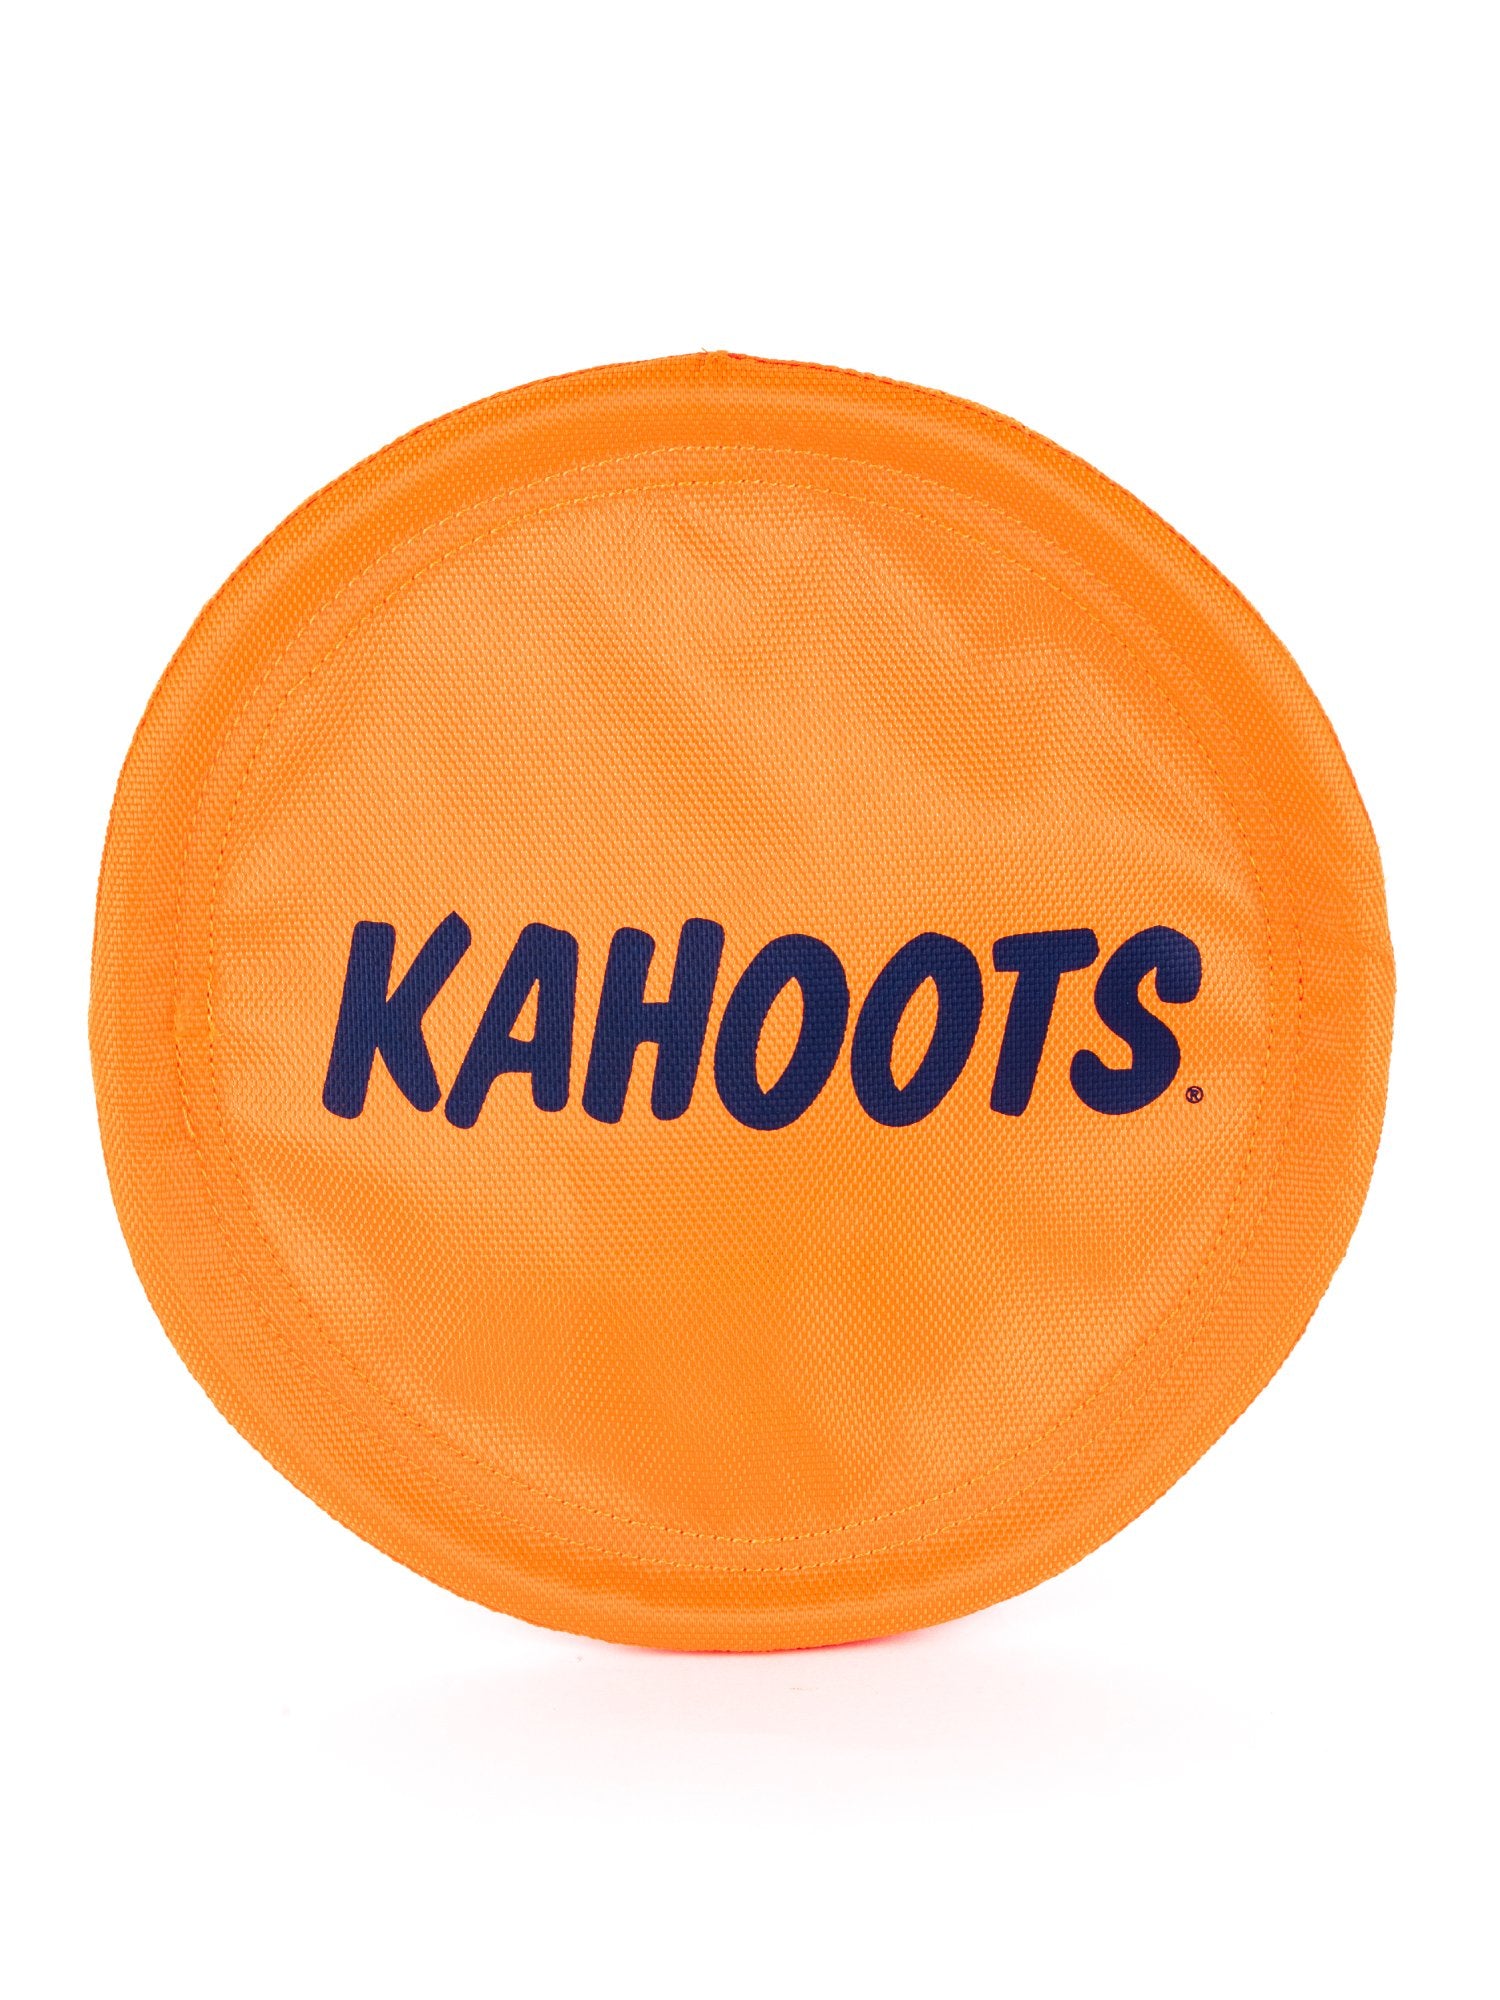 Orange, flexible frisby with "Kahoots" printed on it